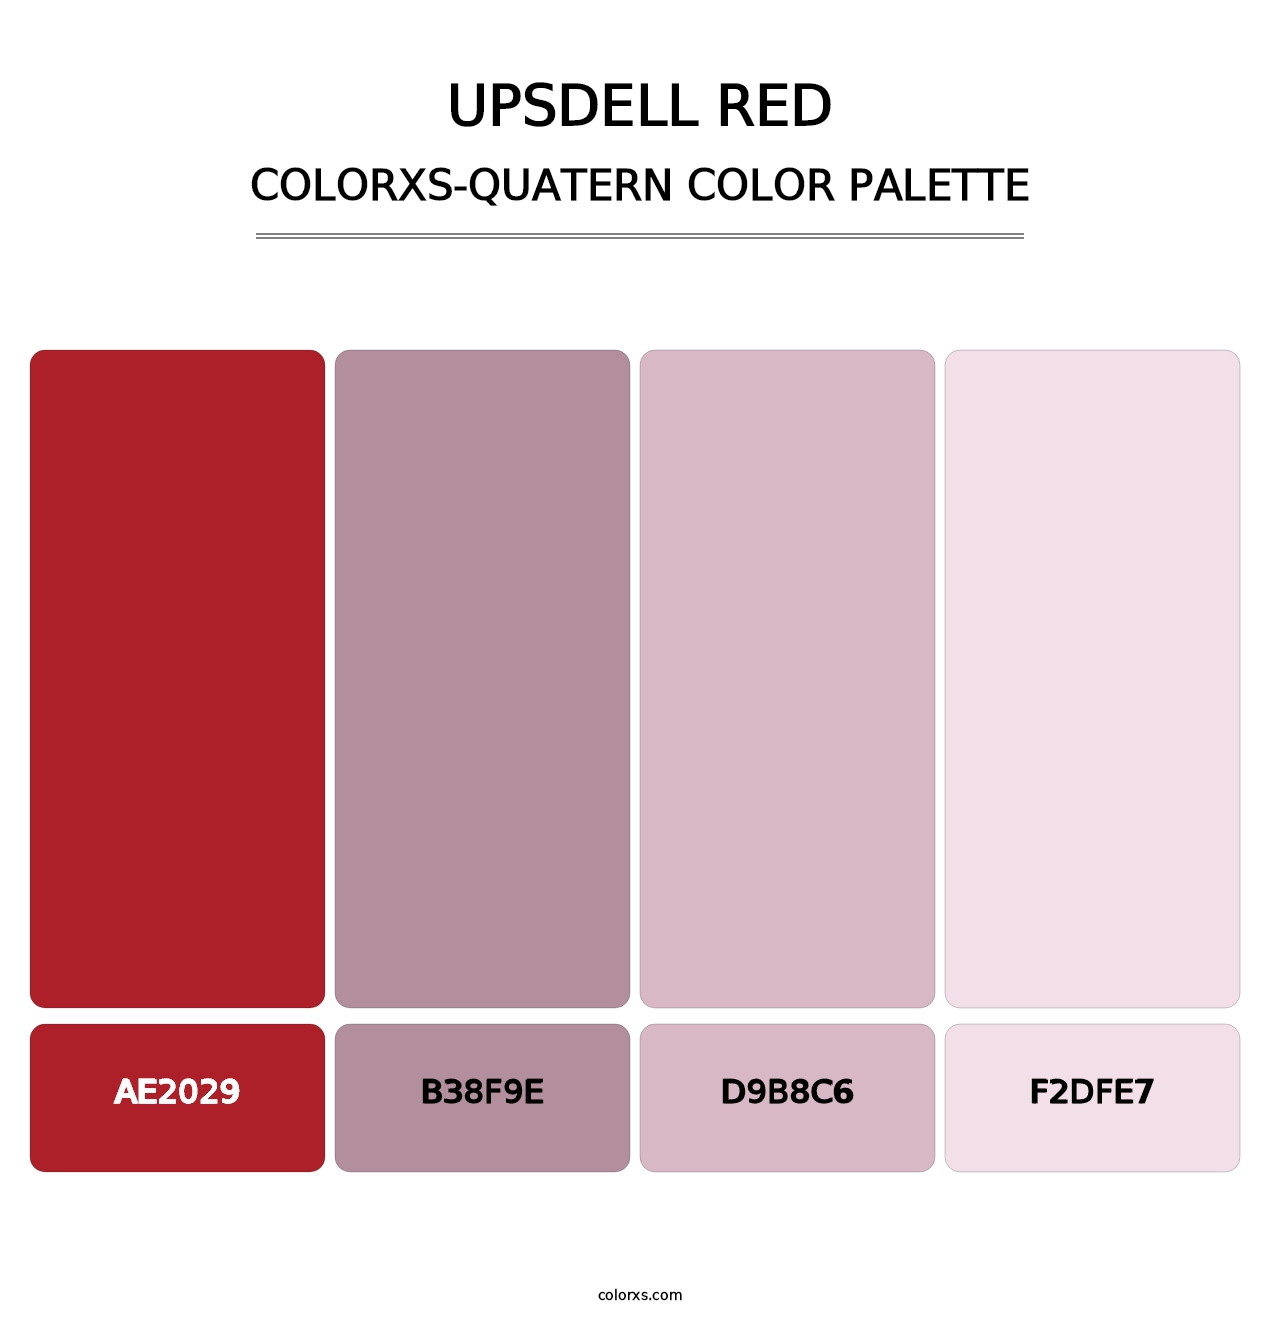 Upsdell Red - Colorxs Quatern Palette